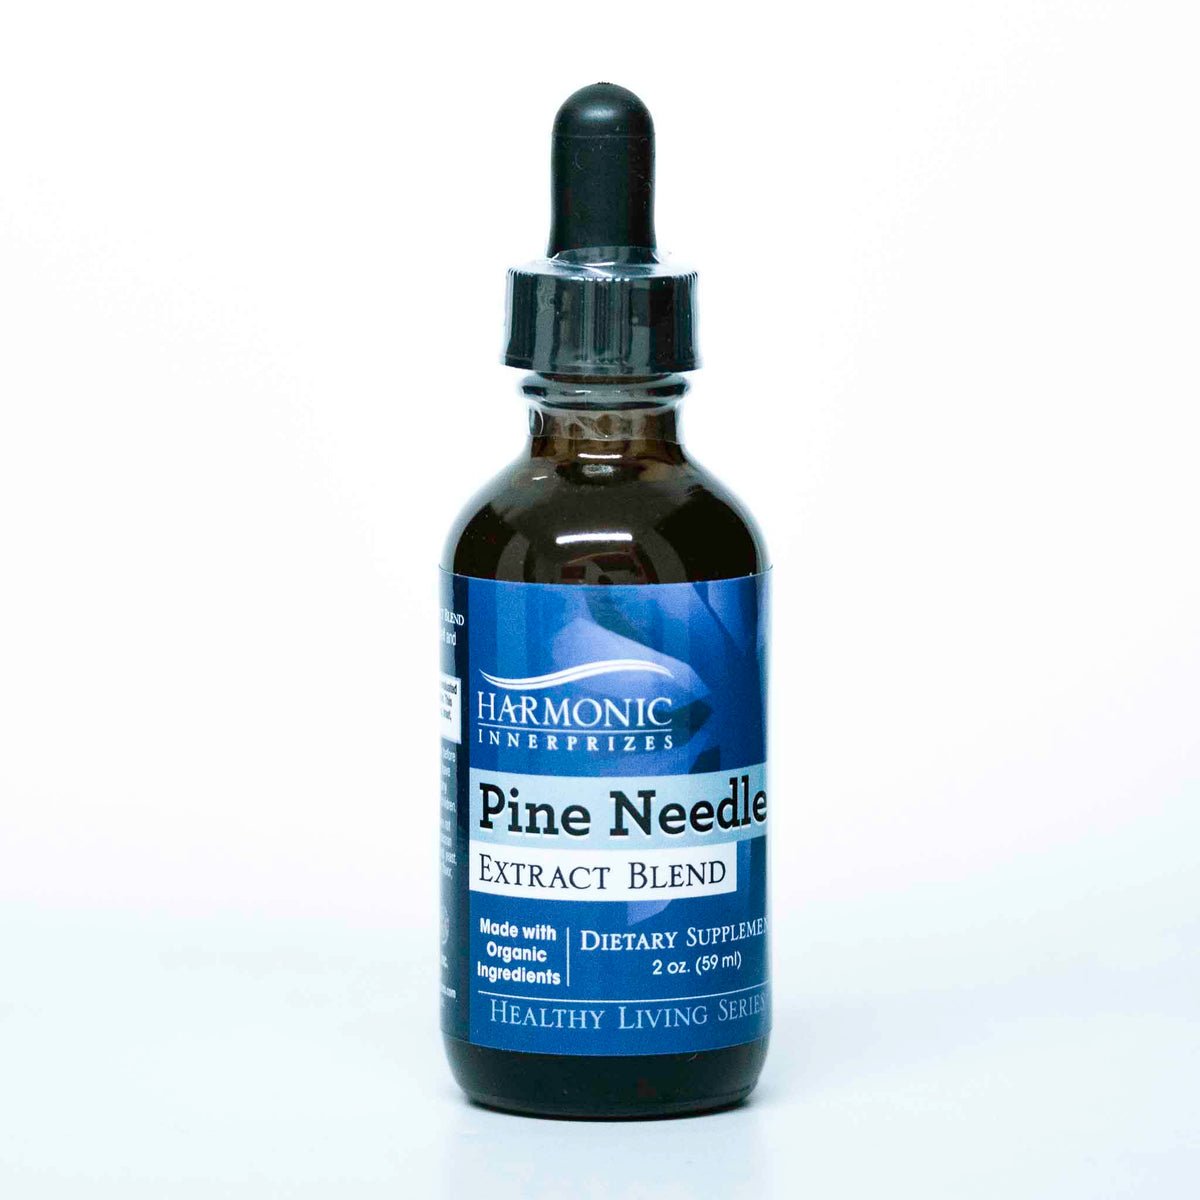 Pine Needle Extract | Harmonic Innerprizes | Raw Living UK | Harmonic Innerprizes Pine Needle Extract was created to address the health consequences from the consumption of GMOs. Also said to help stop blood clots.